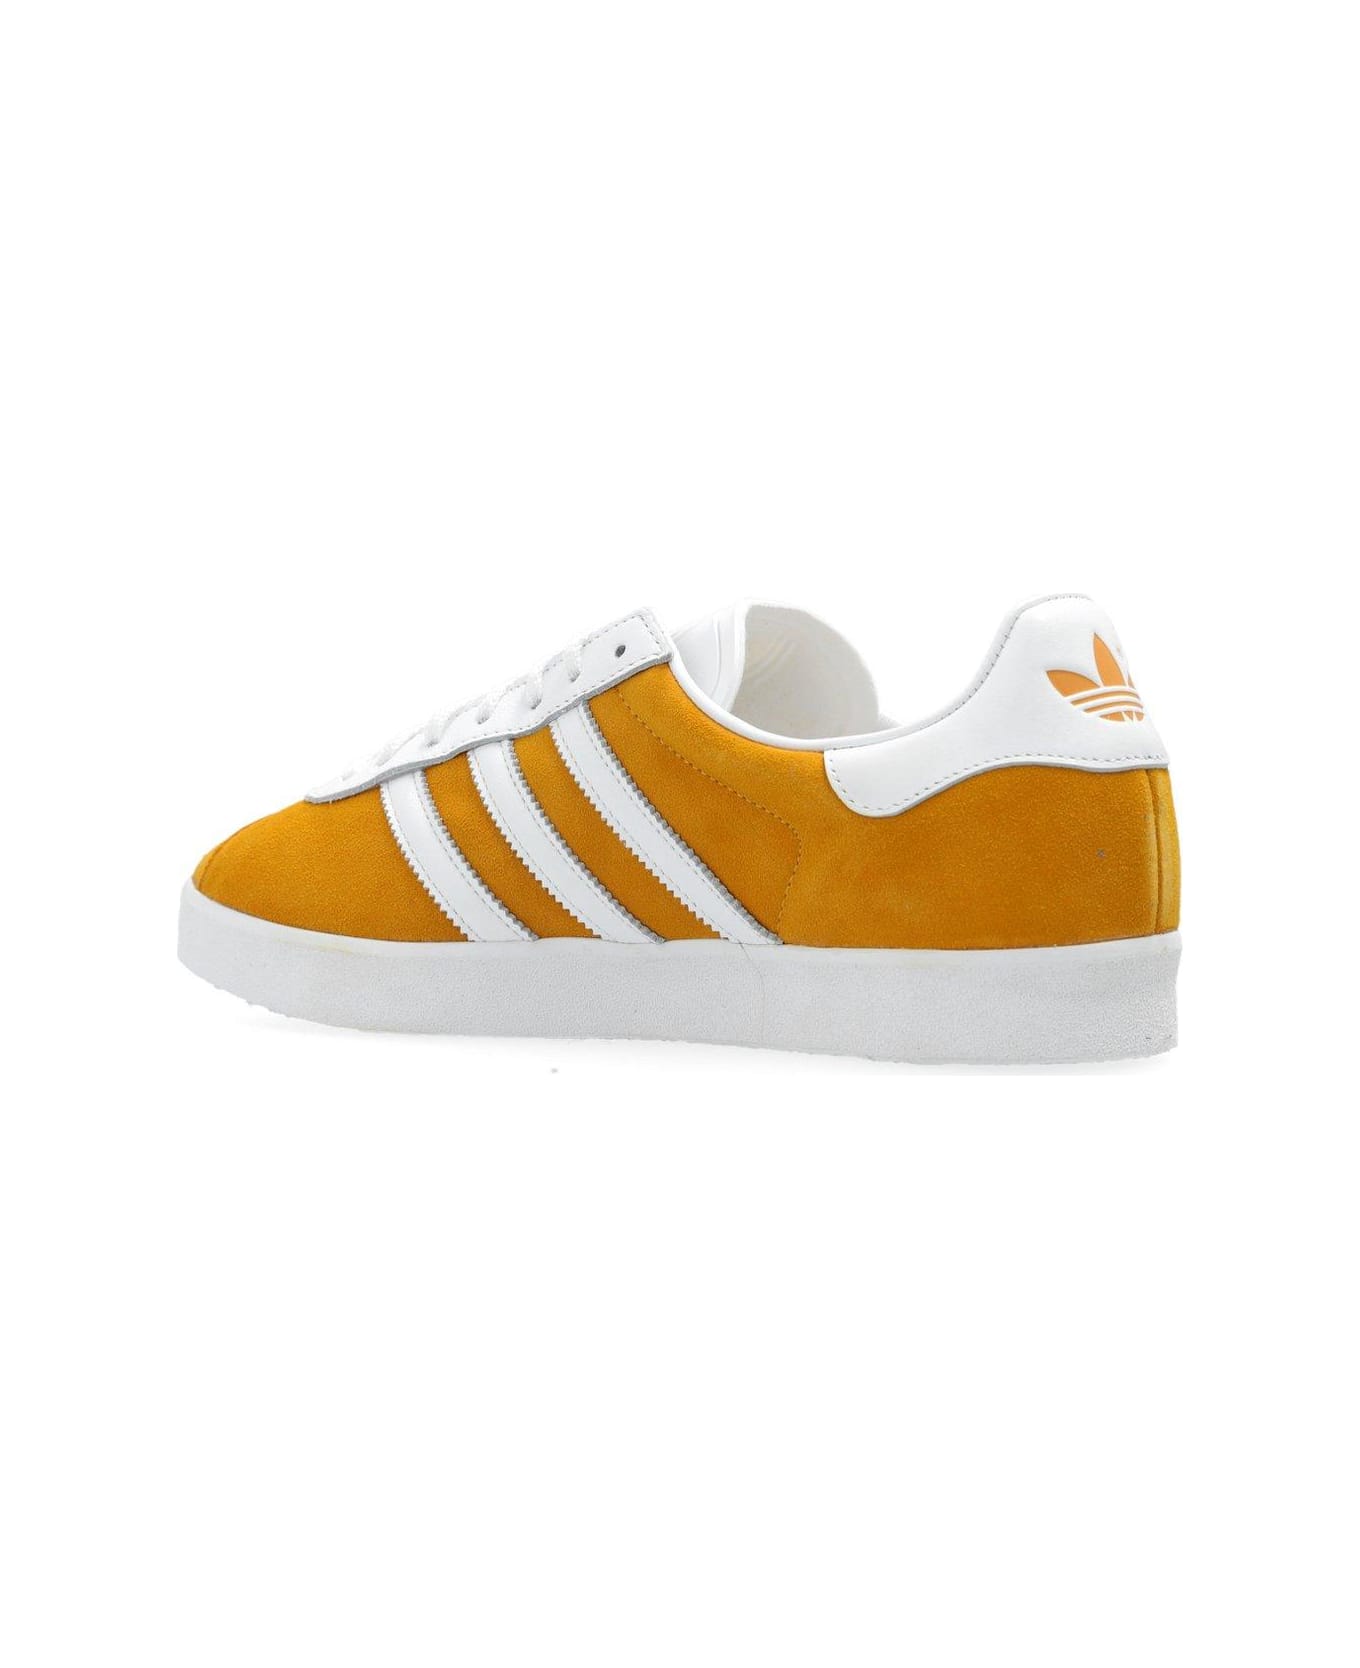 Adidas Gazelle 85 Lace-up Sneakers - Yellow スニーカー